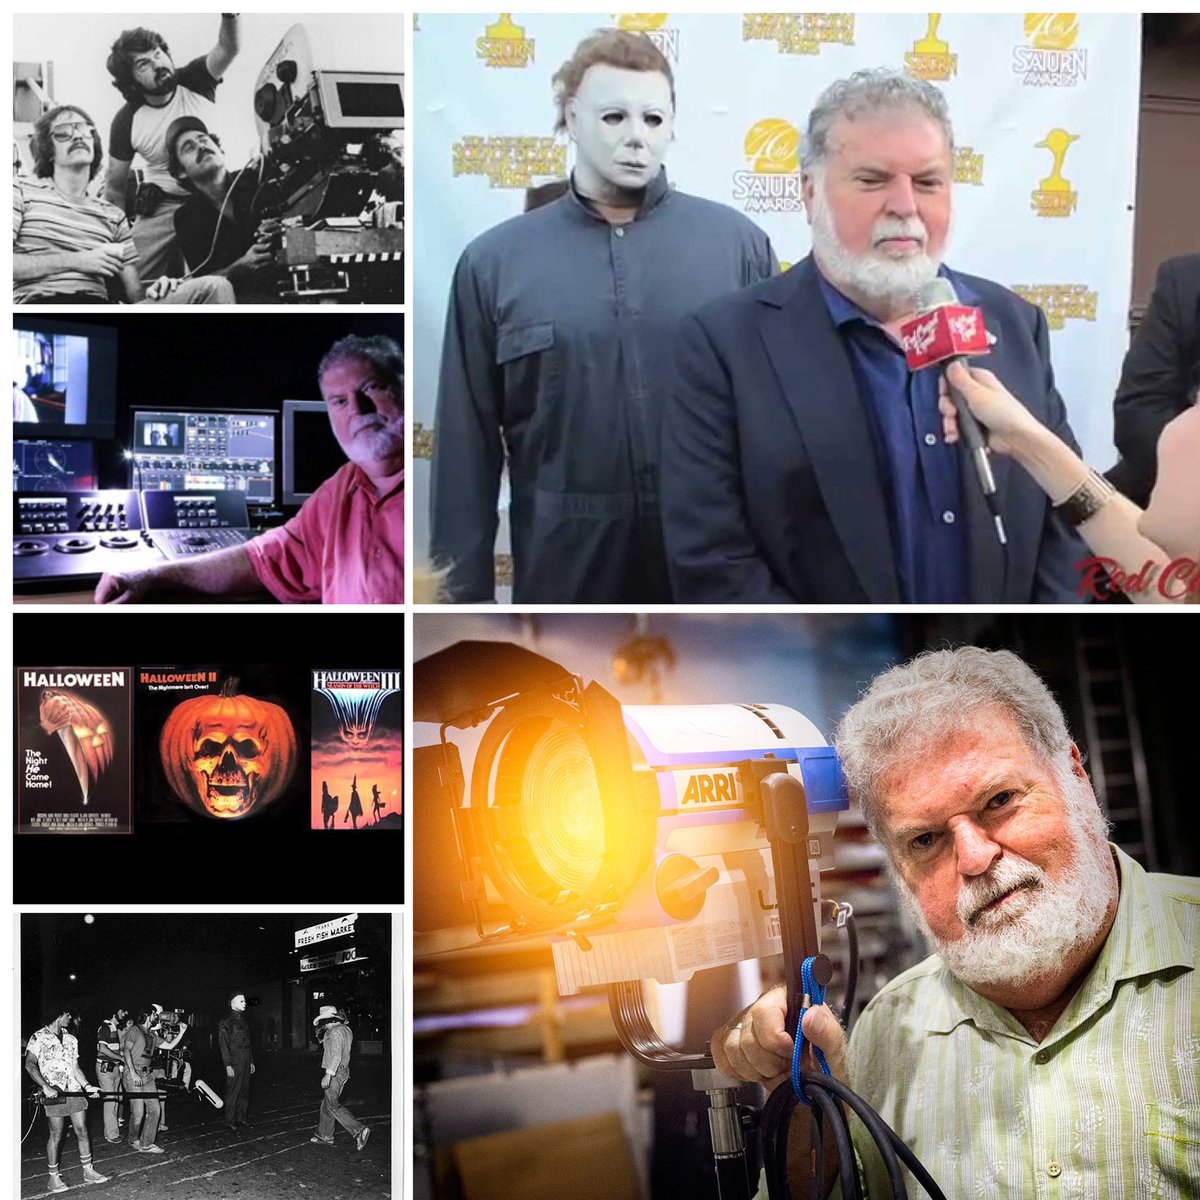 Happy Birthday to Dean Cundey! #Halloween #MichaelMyers #DeanCundey #cinematography